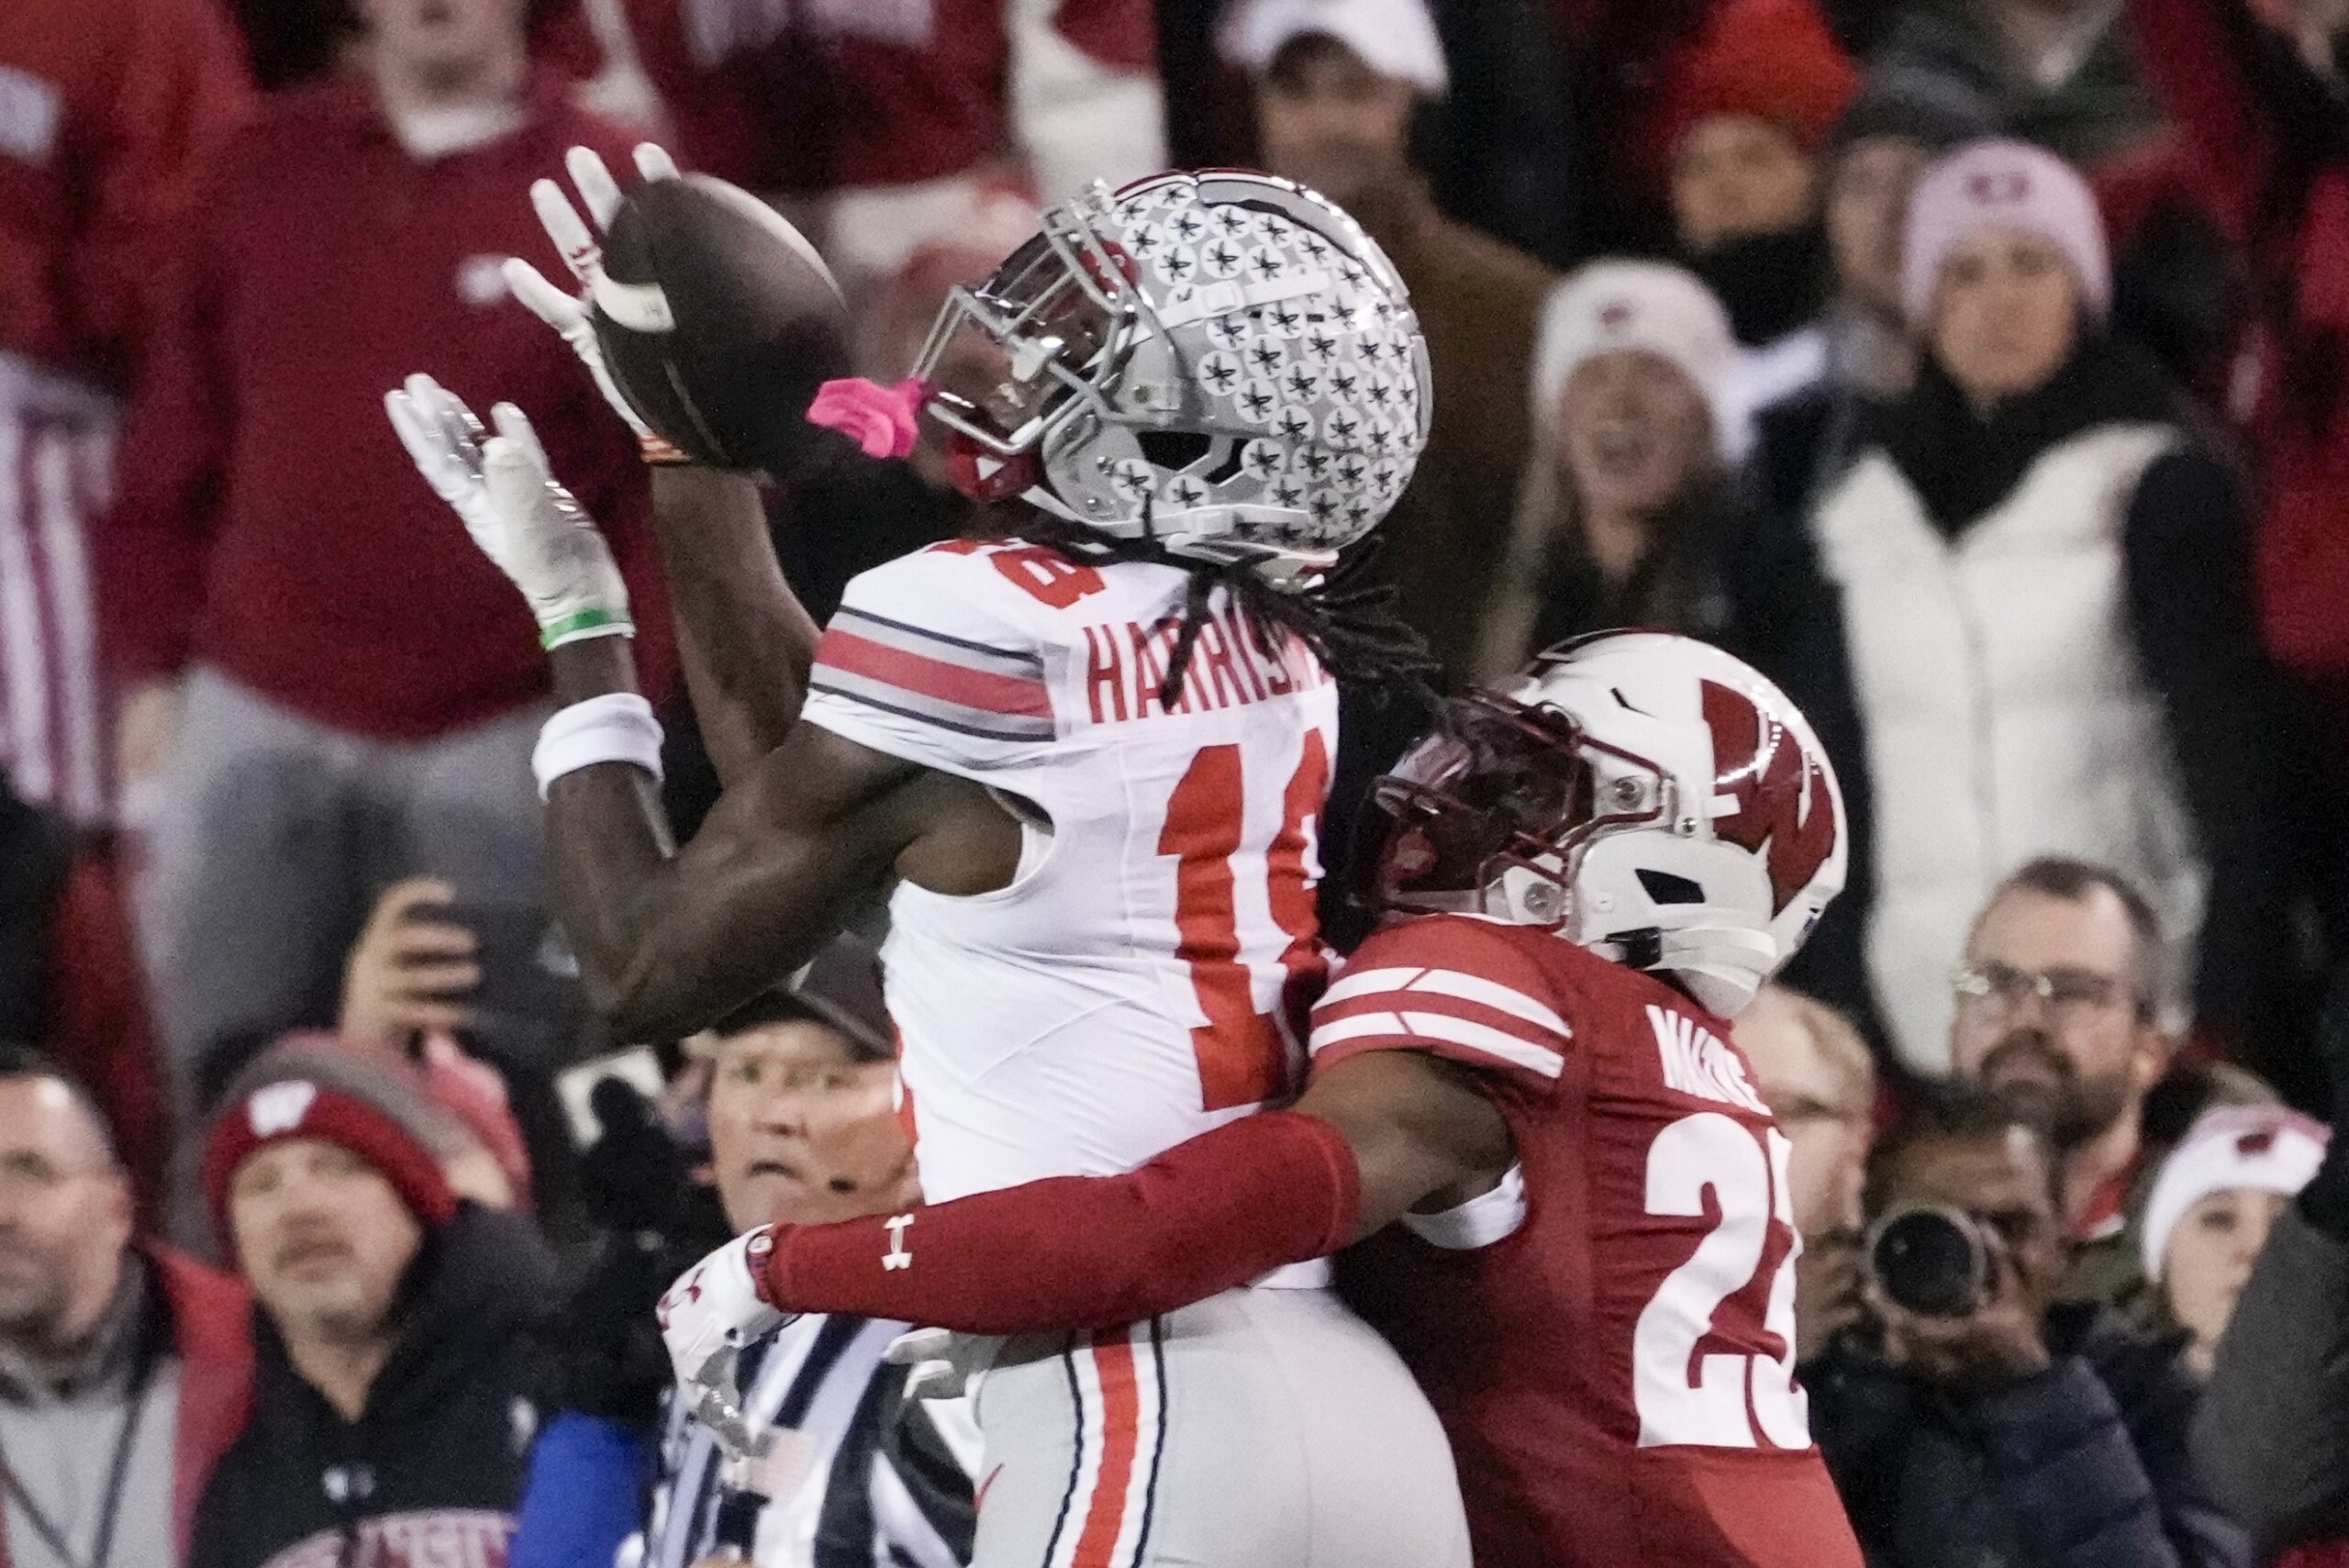 Harrison, Henderson lead unbeaten and No. 3-ranked Ohio State to 24-10 victory at Wisconsin